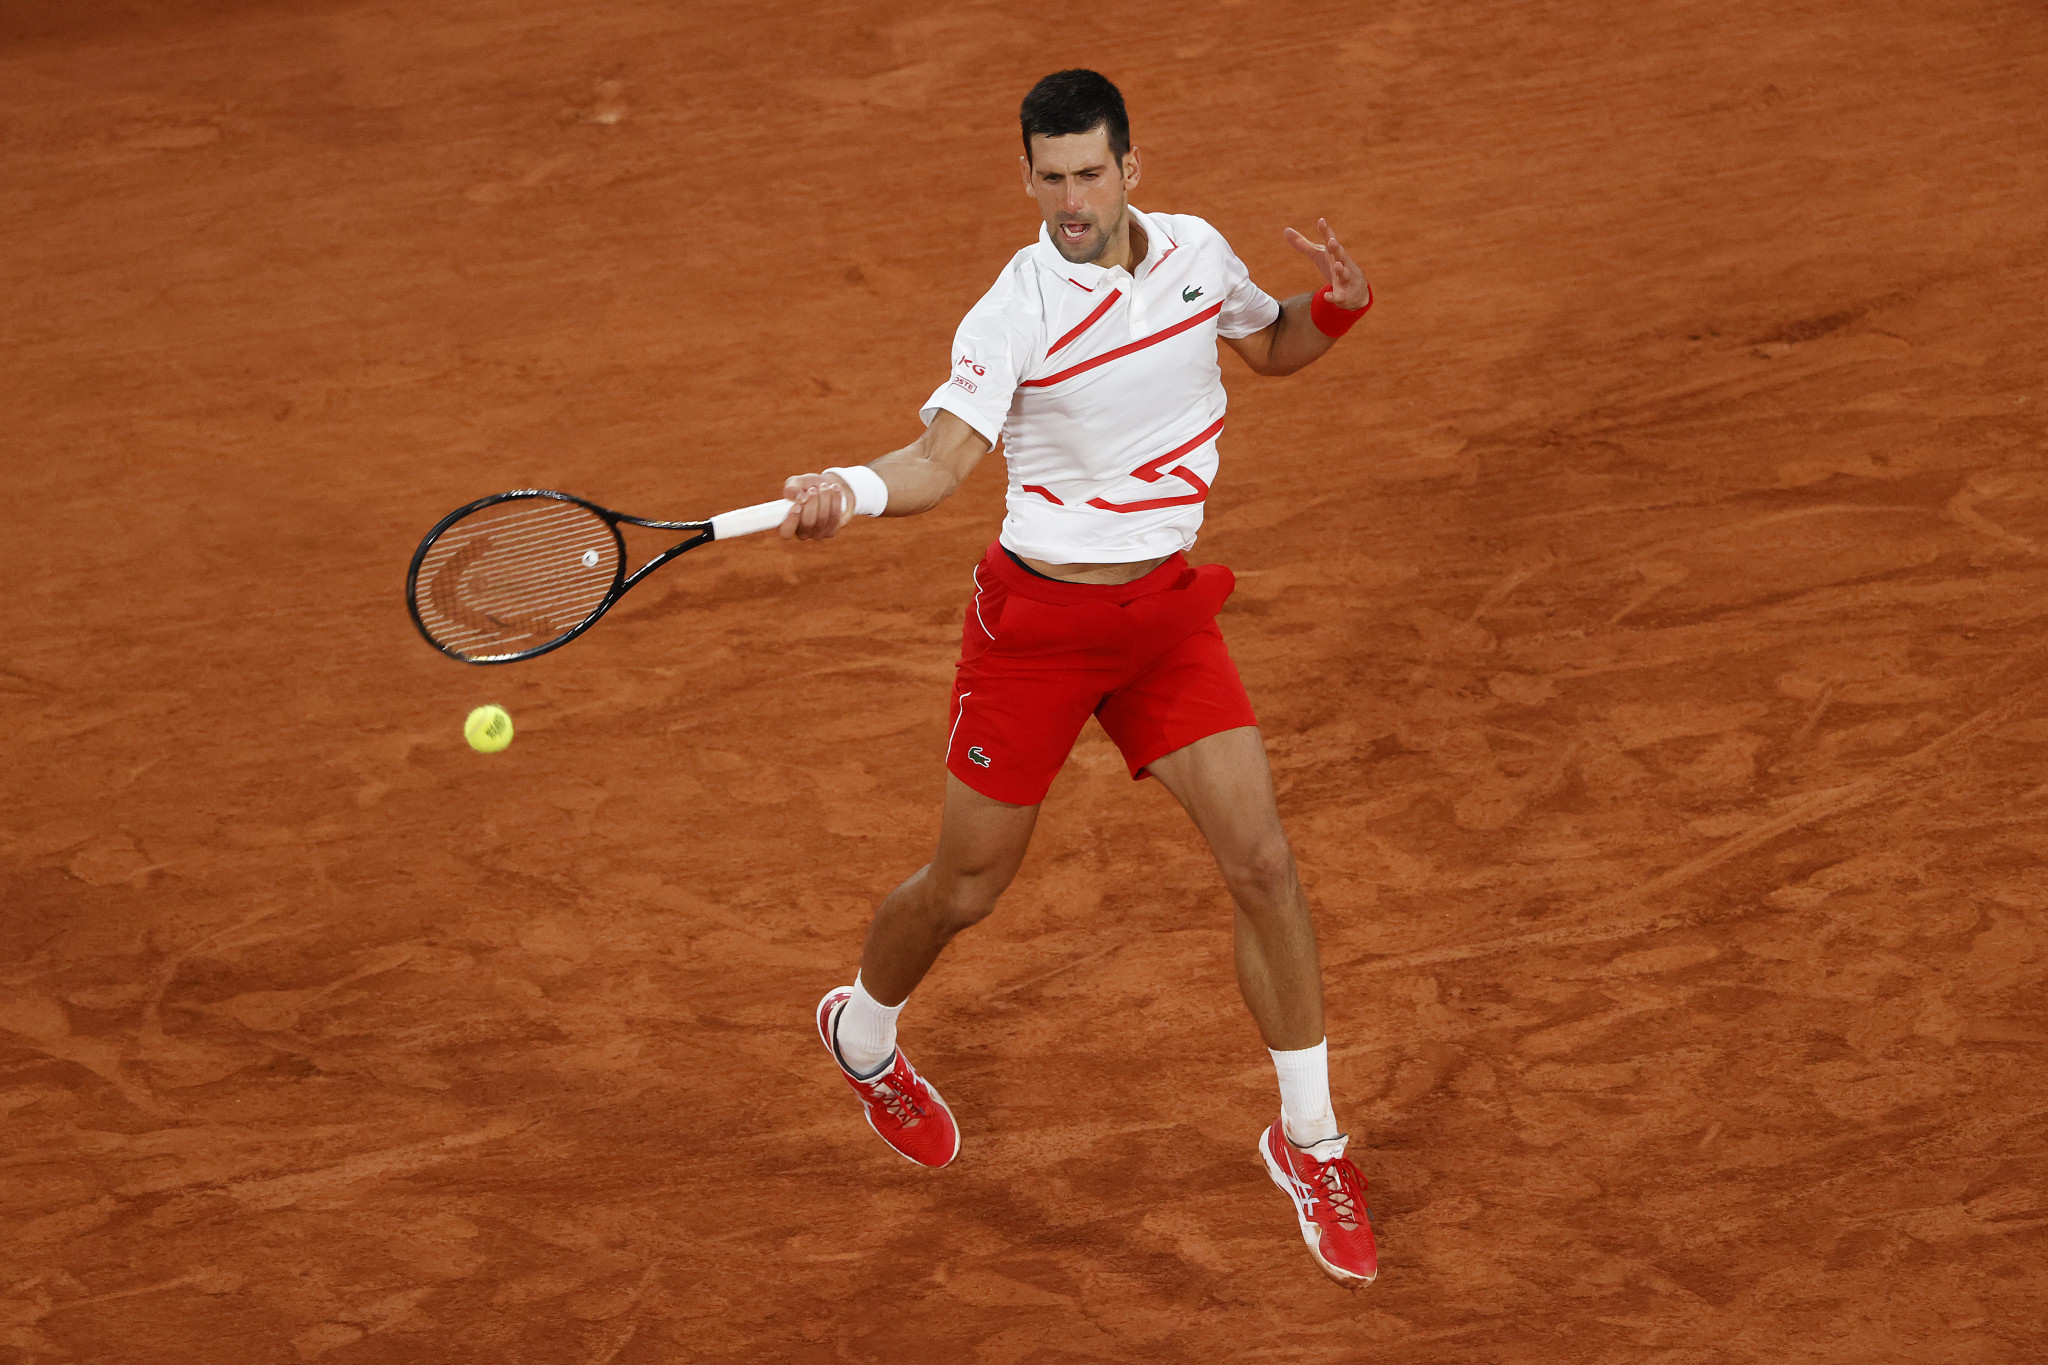 Men's top seed Novak Djokovic cruised through to round two of the French Open in Paris ©Getty Images